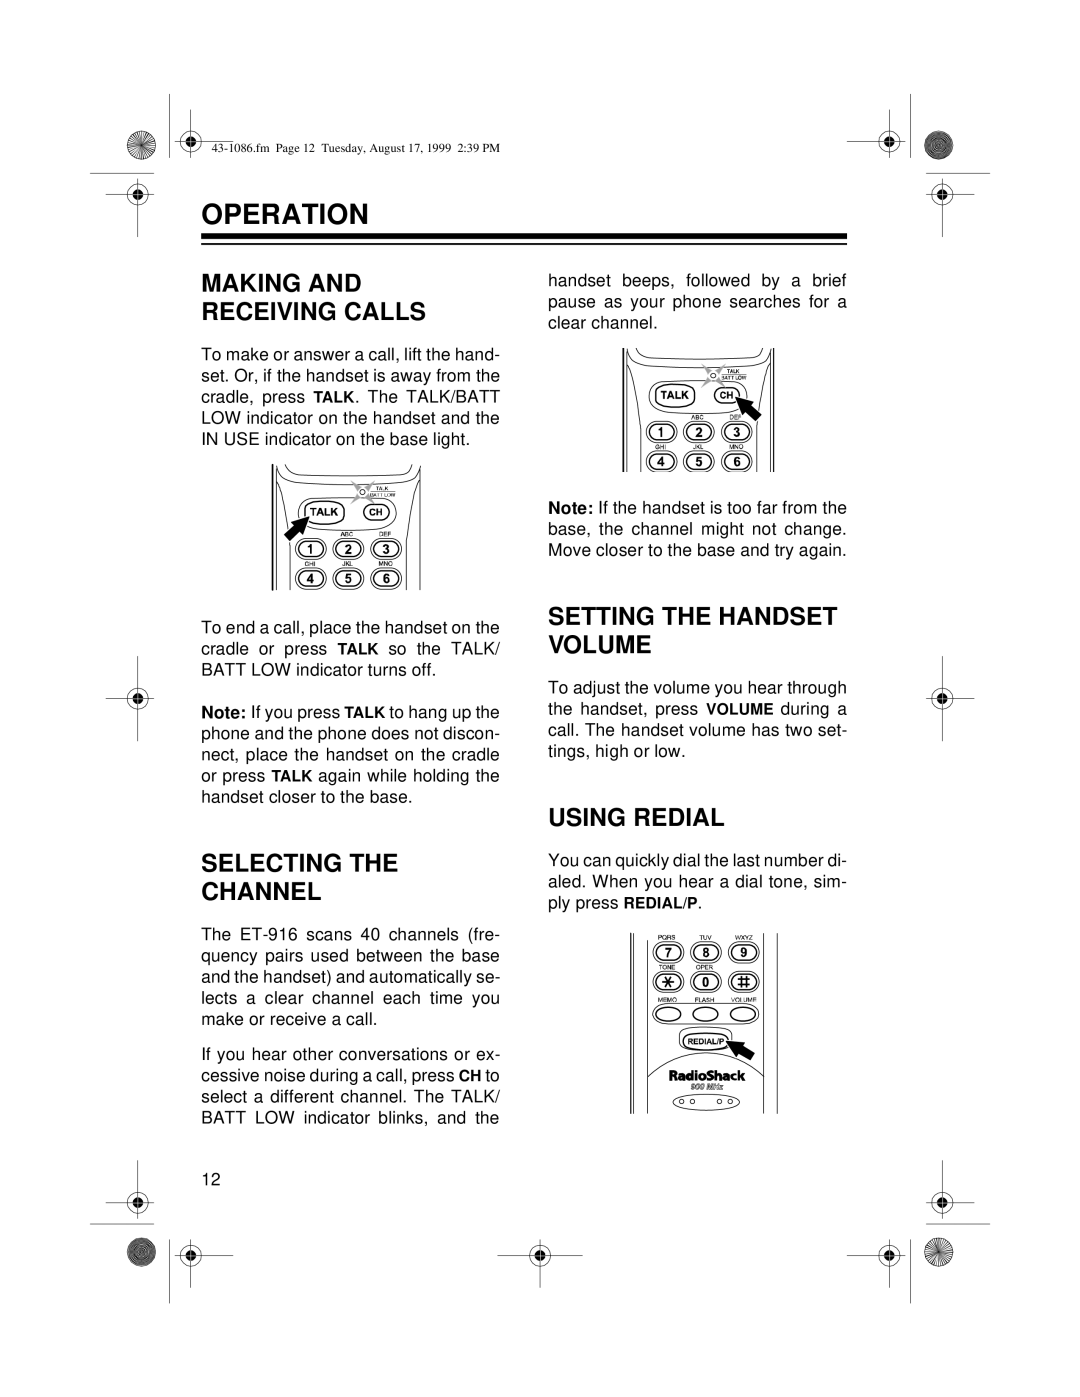 Radio Shack ET-916 Operation, Making And Receiving Calls, Setting The Handset Volume, Selecting The Channel, Using Redial 